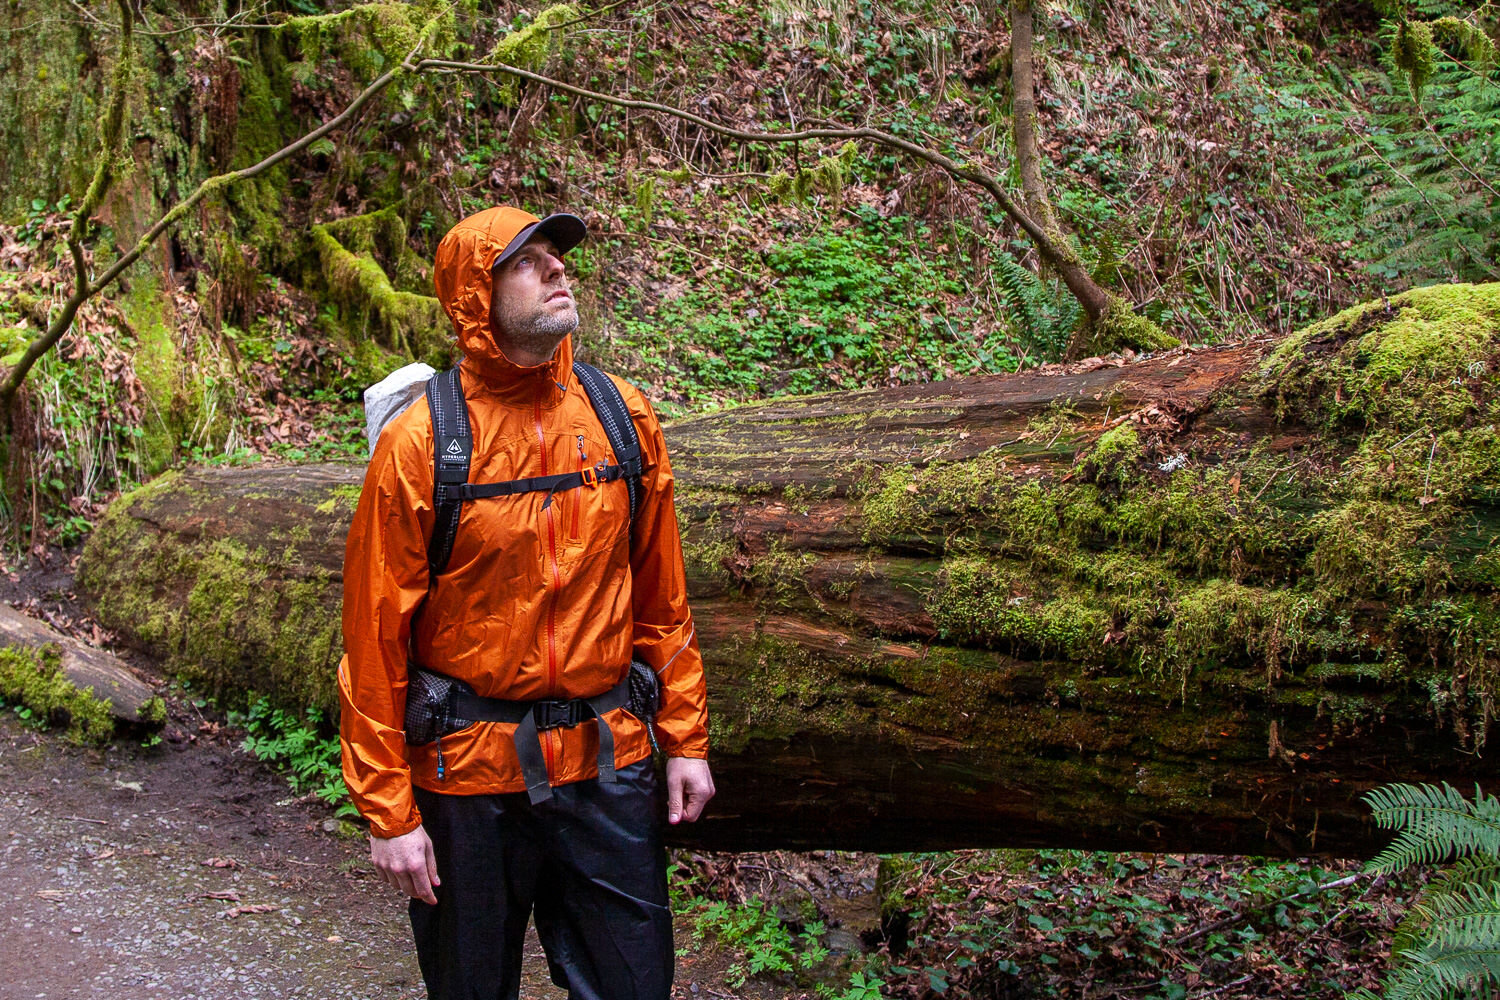 The Outdoor Research Helium Rain Jacket is an affordable ultralight option for backpacking